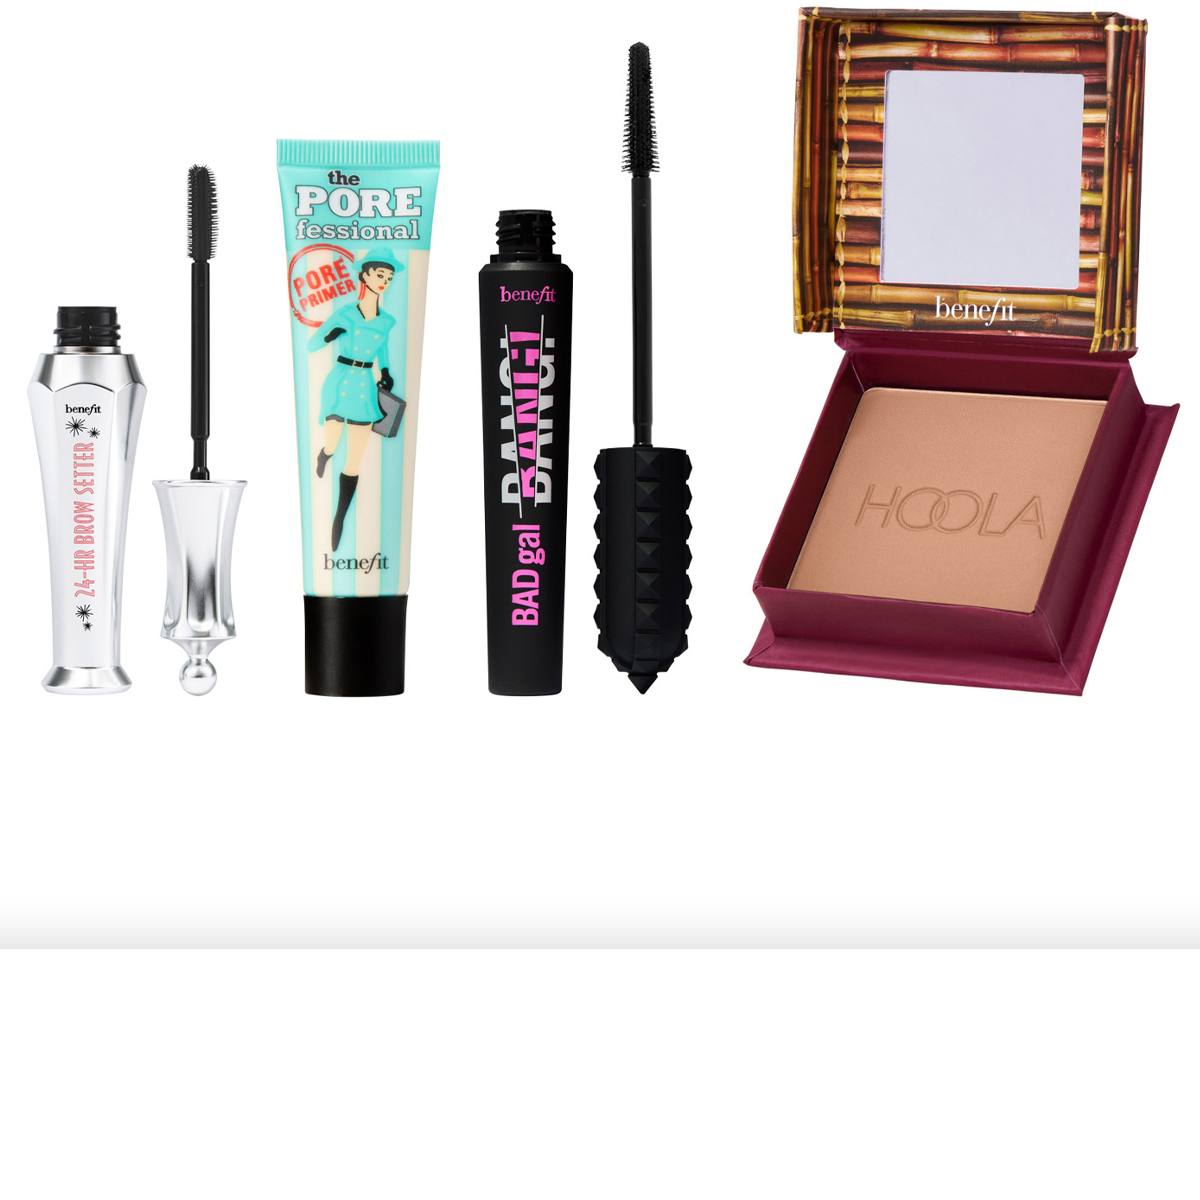 Benefit cosmetics sale: Save on best-selling beauty products and